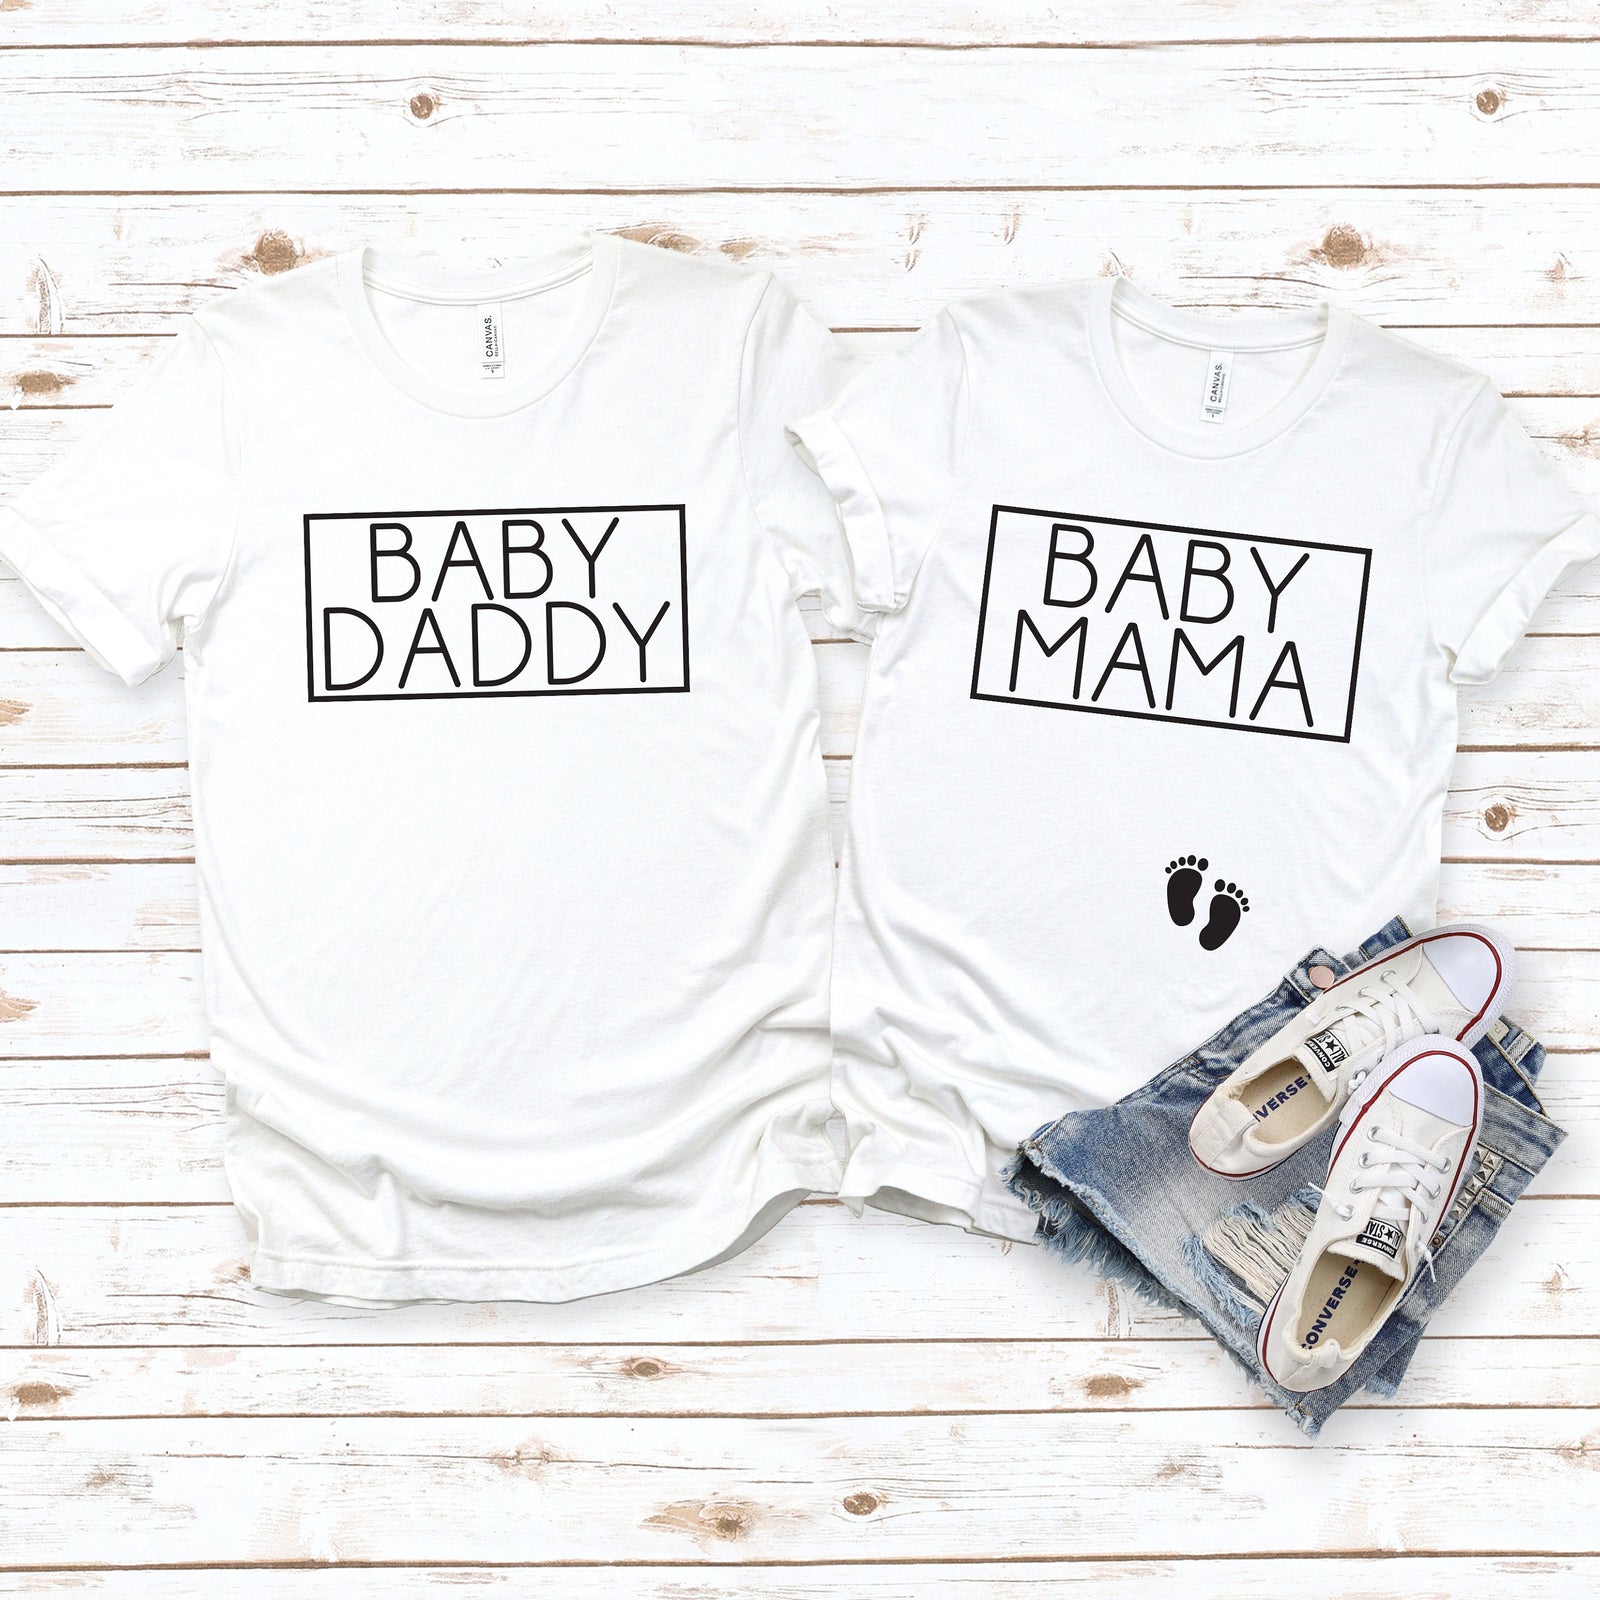 Baby Mama Baby Daddy Couples Shirt - Matching Parents Shirts - Reveal - Baby Announcement Shirt - Soon To Be Parents